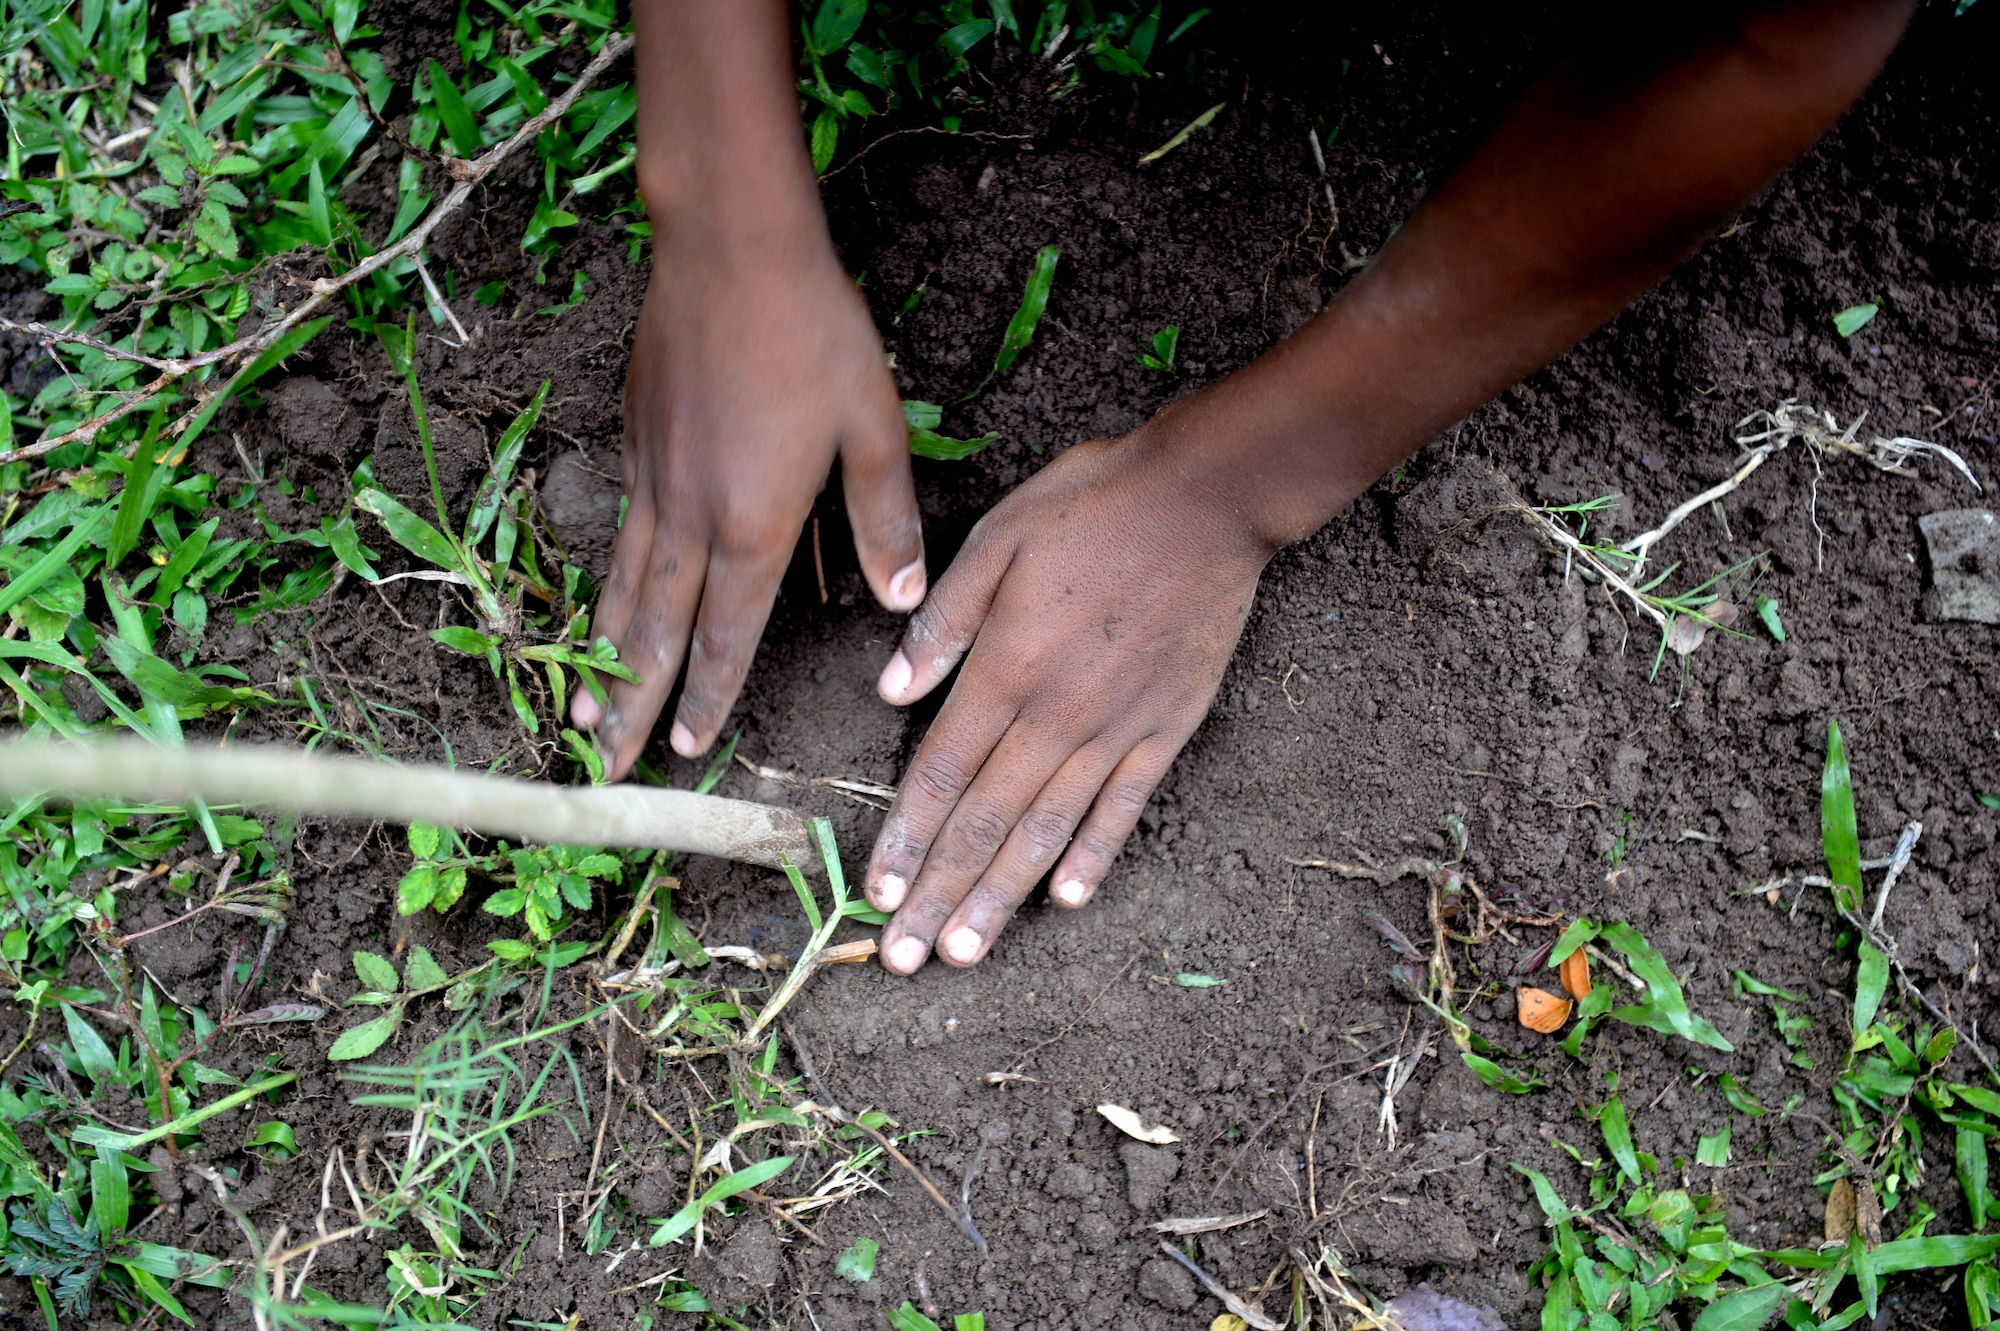 A student pats the dirt around a tree during the National Tree Day celebration at Rafeal Peneda Ponce School in Trujillo, Honduras, June 19, 2015. NEW HORIZONS Honduras 2015 personnel were at the event in between providing support throughout the Trujillo and Tocoa regions of Honduras by building a new two-classroom schoolhouse in Ocotes Alto, drilling a well in Honduras Aguan, and proving general medical support. NEW HORIZONS was launched in the 1980s and is an annual joint humanitarian assistance exercise that U.S. Southern Command conducts with a partner nation in Central America, South America or the Caribbean. The exercise improves joint training readiness of U.S. and partner nation civil engineers, medical professionals and support personnel through humanitarian assistance activities. (U.S. Air Force photo by Capt. David J. Murphy/Released)